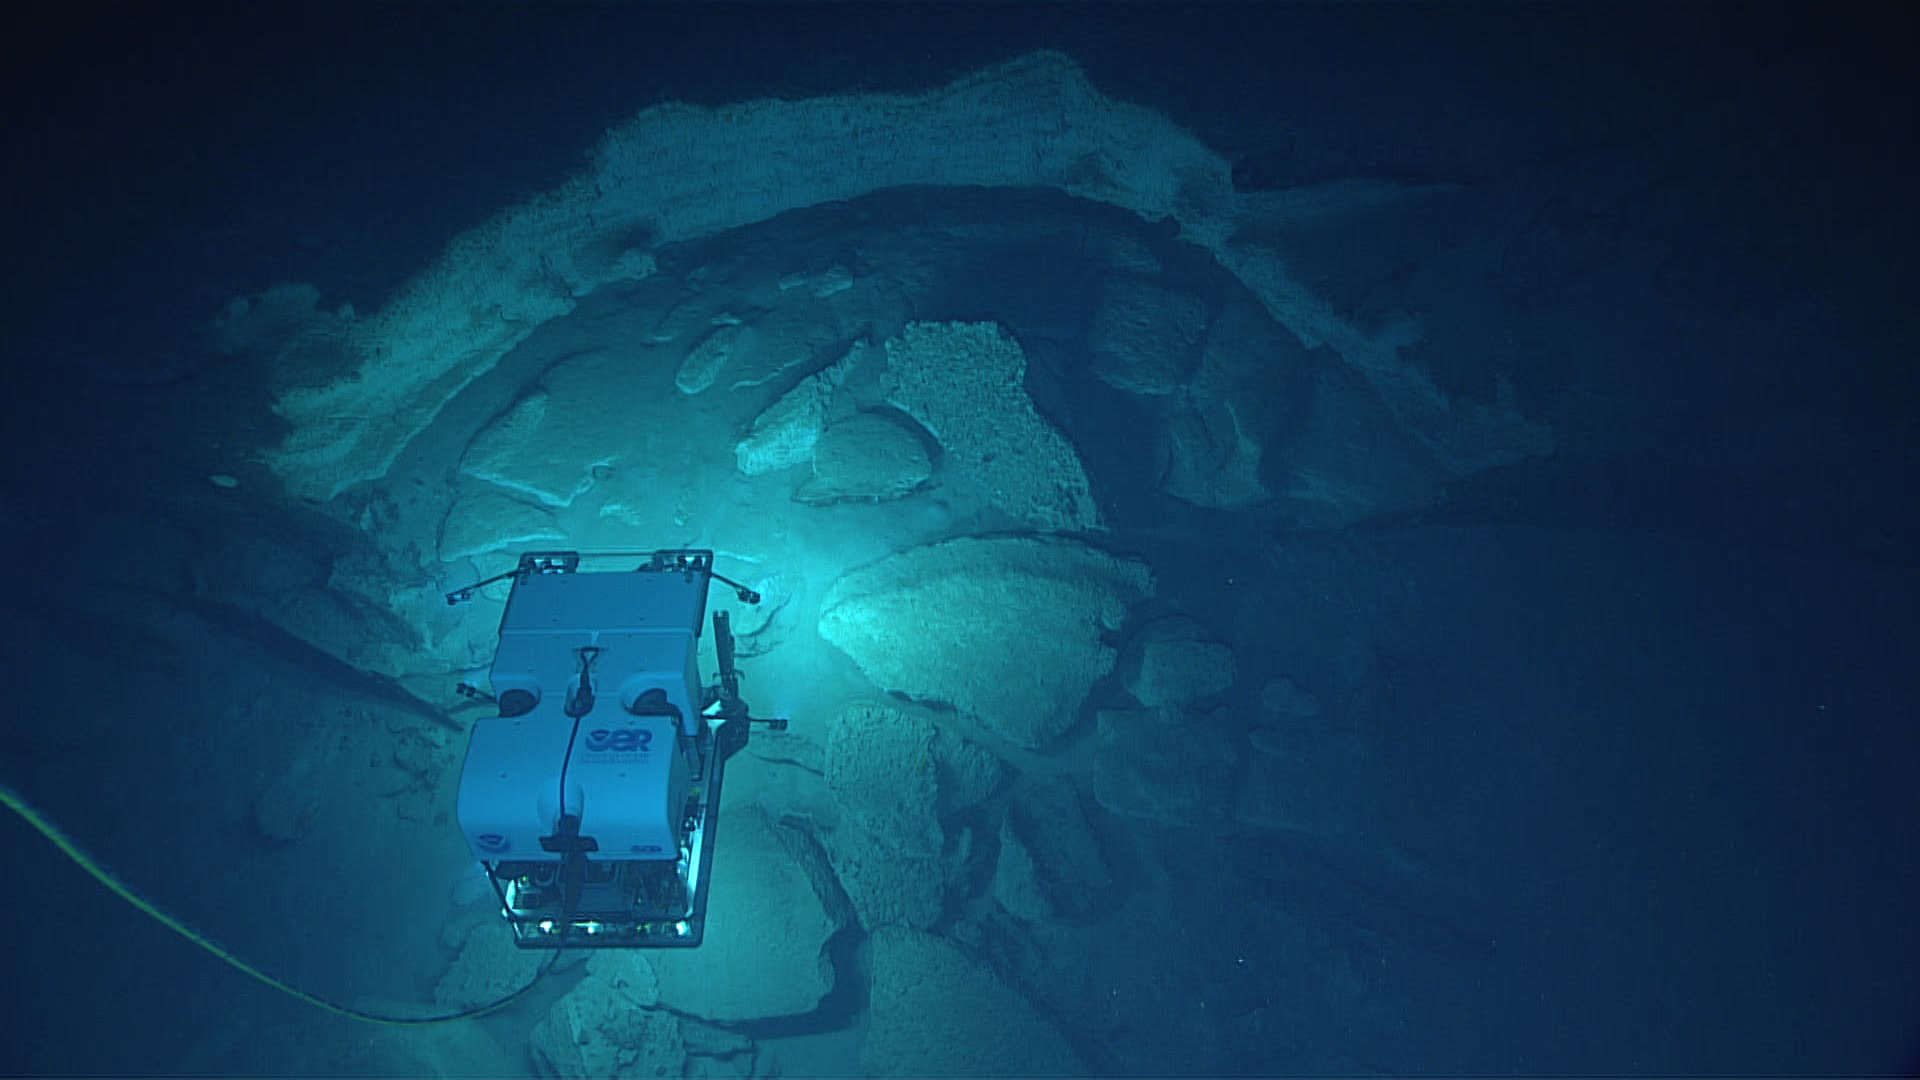 Figure 2. Remotely operated vehicle Deep Discoverer investigates some of the striking geology seen at “Okeanos Ridge” during Dive 03 of the Gulf of Mexico 2017 expedition. Image courtesy of NOAA’s Office of Ocean Exploration and Research. Download larger version (jpg, 359 KB).